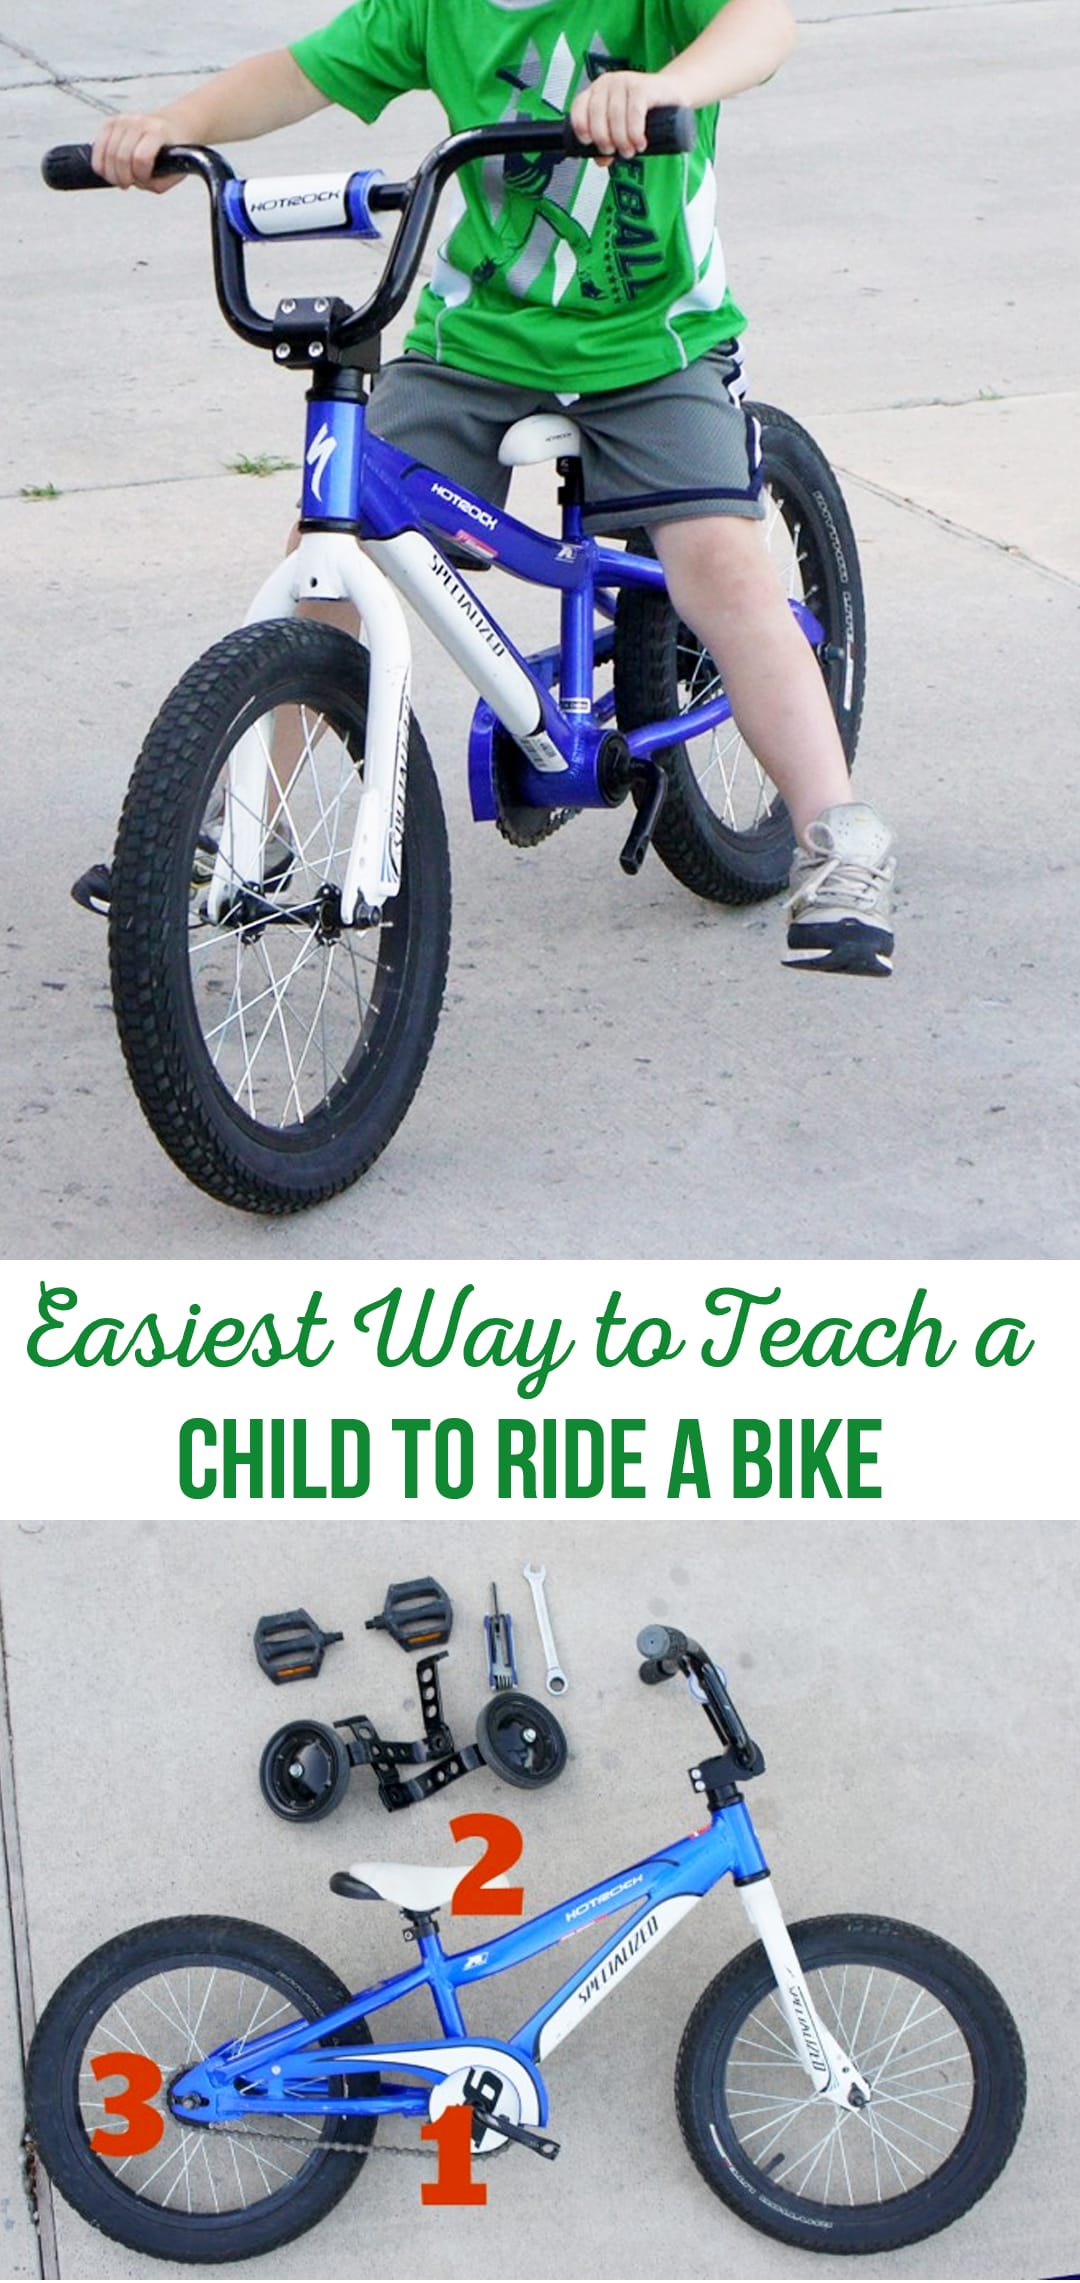 Easiest Way to Teach a Child to Ride a Bike